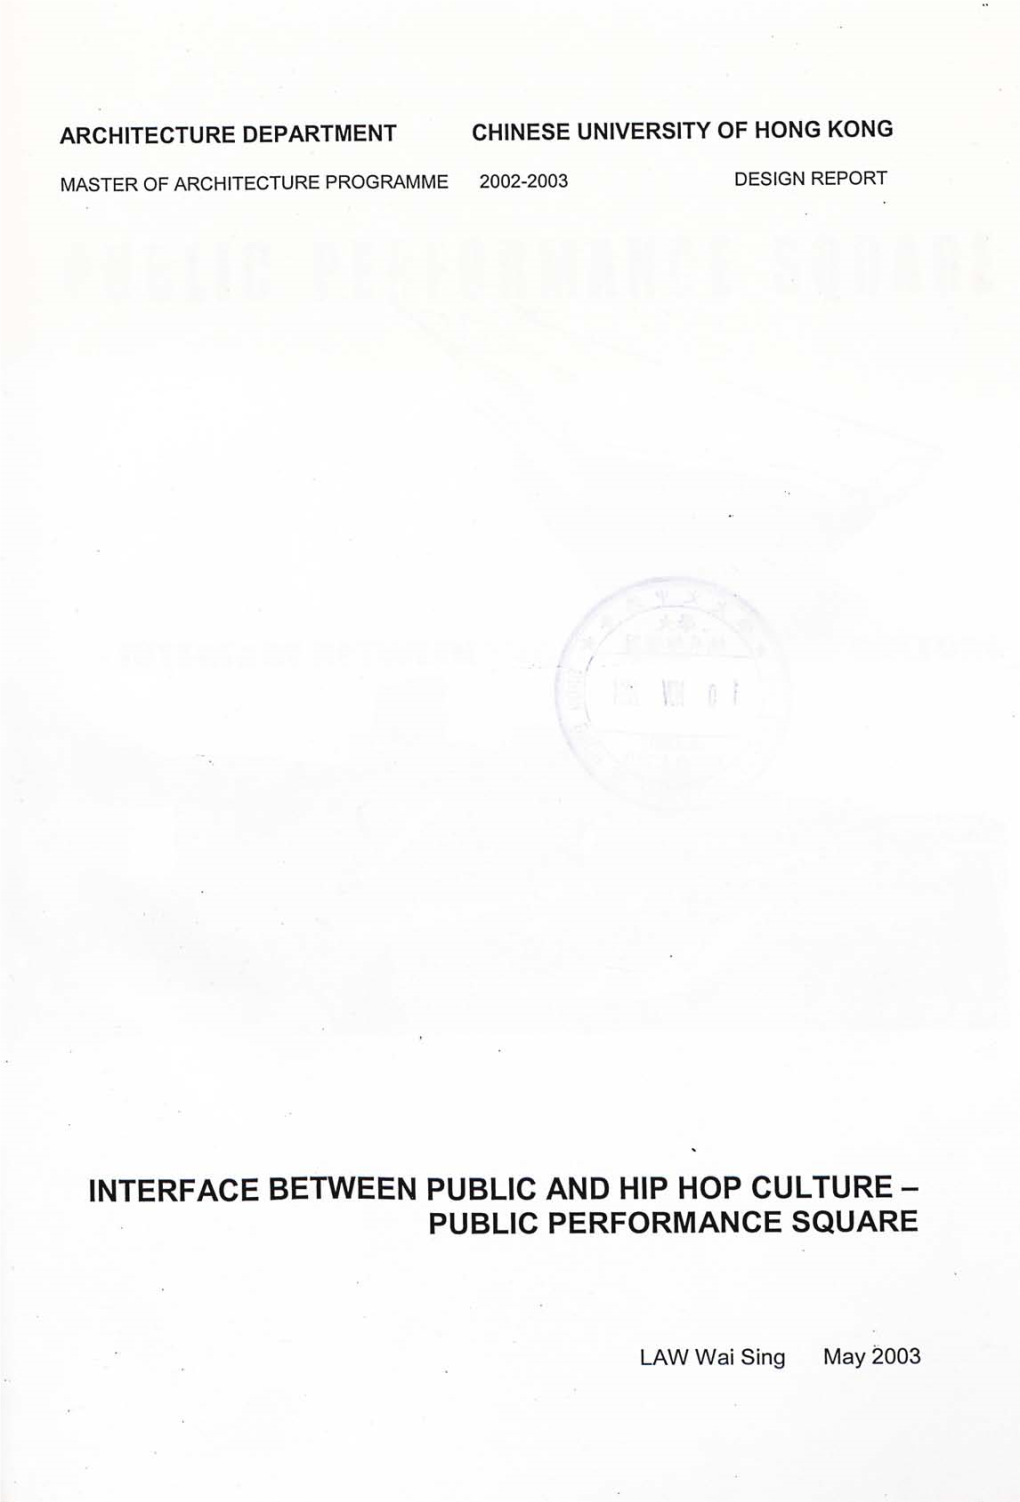 Interface Between Public and Hip Hop Culture 一 Public Performance Square